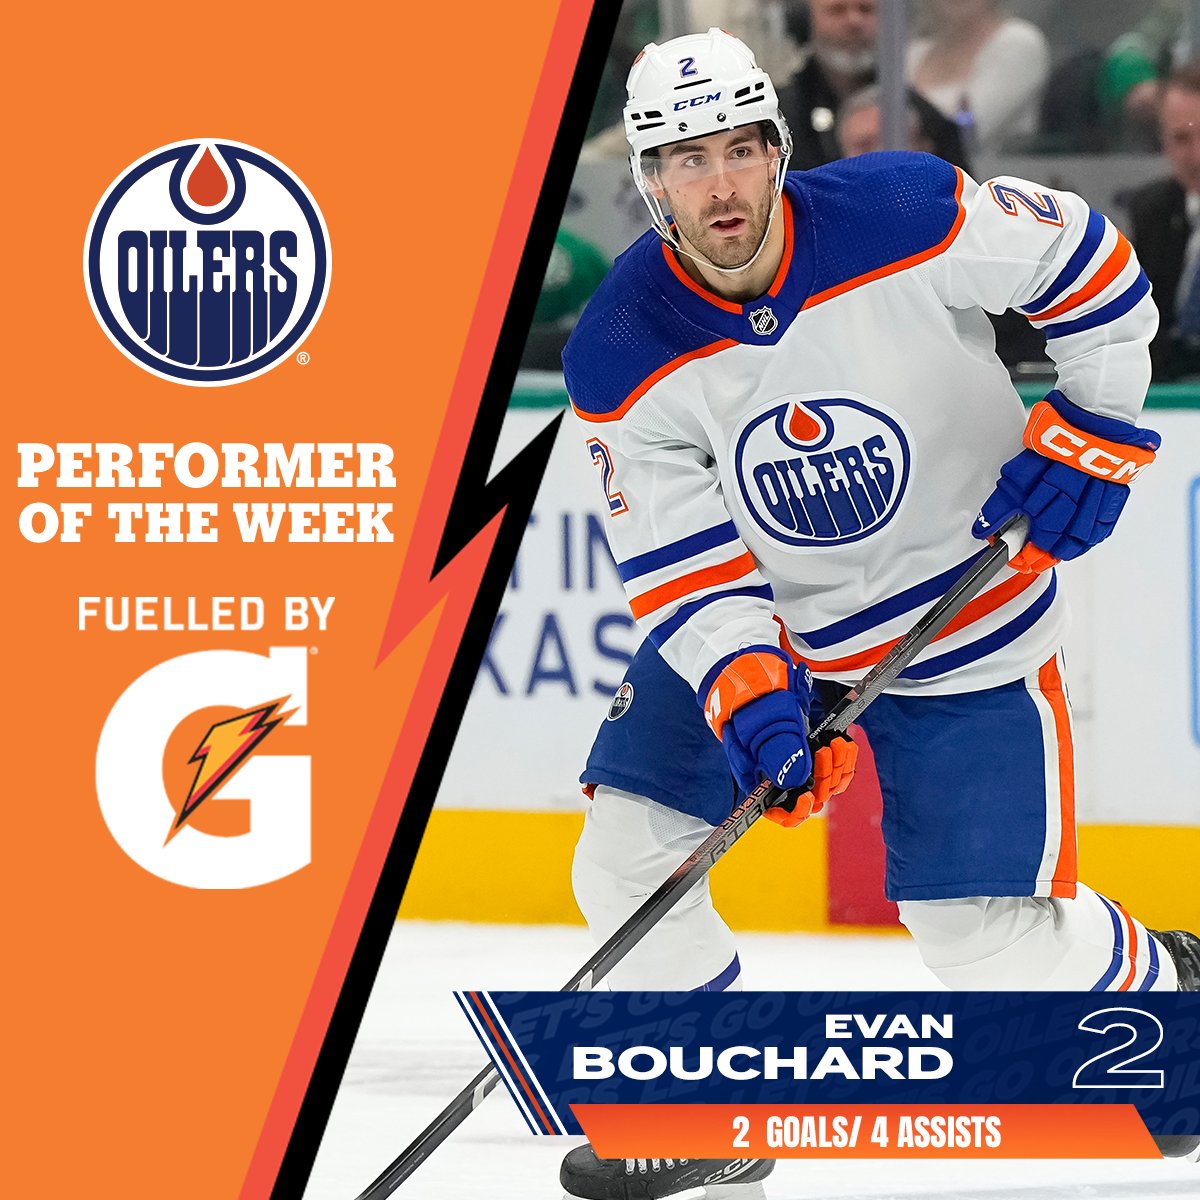 BOOOOUUUUCHHHH 💣

With two goals & four assists in the last three games, Evan is our Performer of the Week ✔️ 

#FuelledByG | #LetsGoOilers